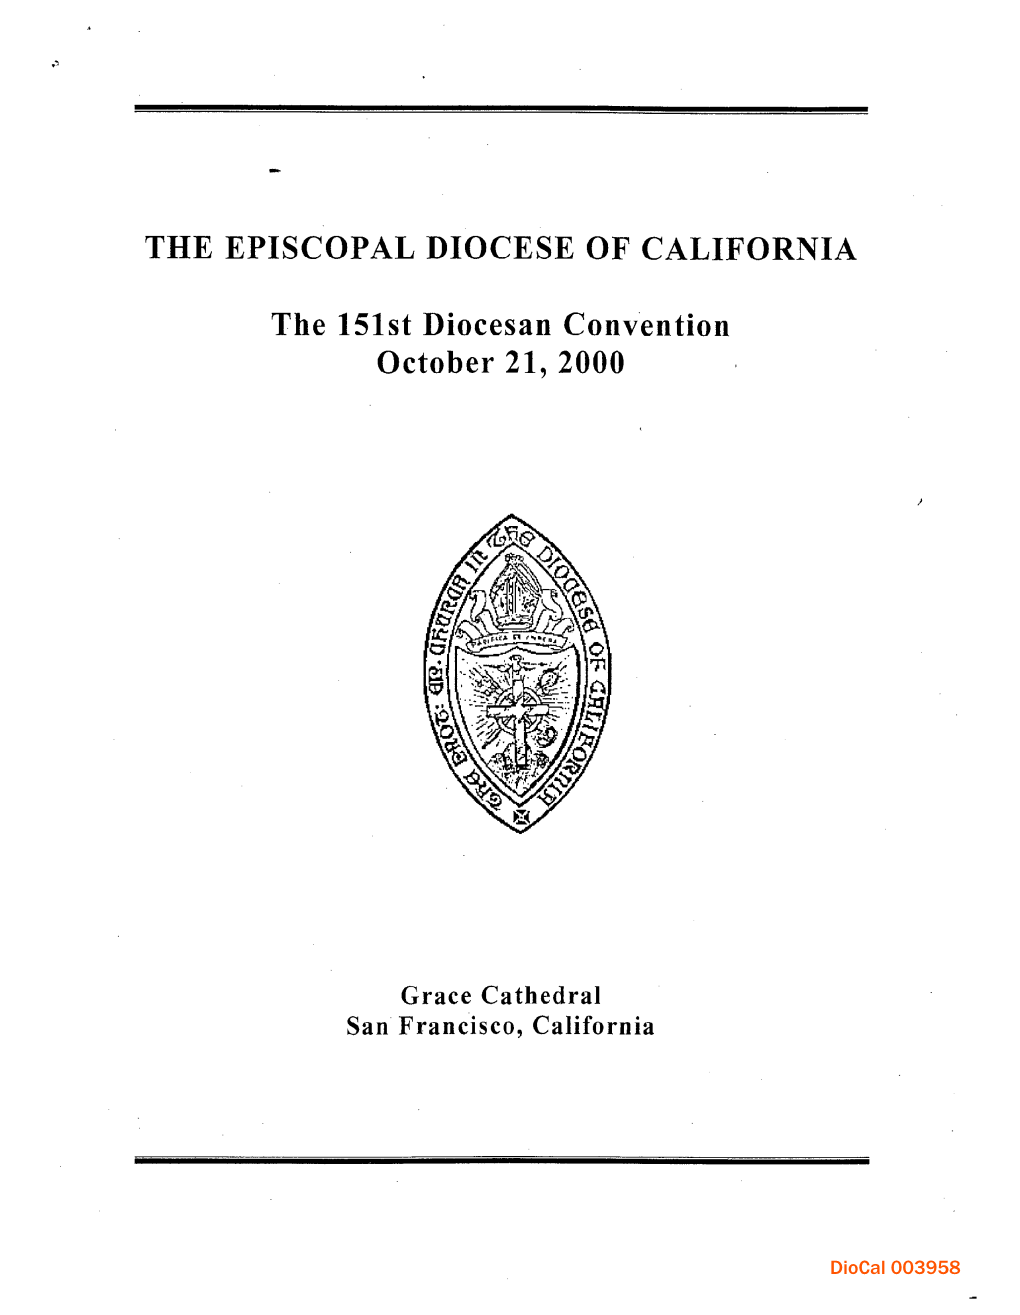 THE EPISCOPAL DIOCESE of CALIFORNIA the 151St Diocesan